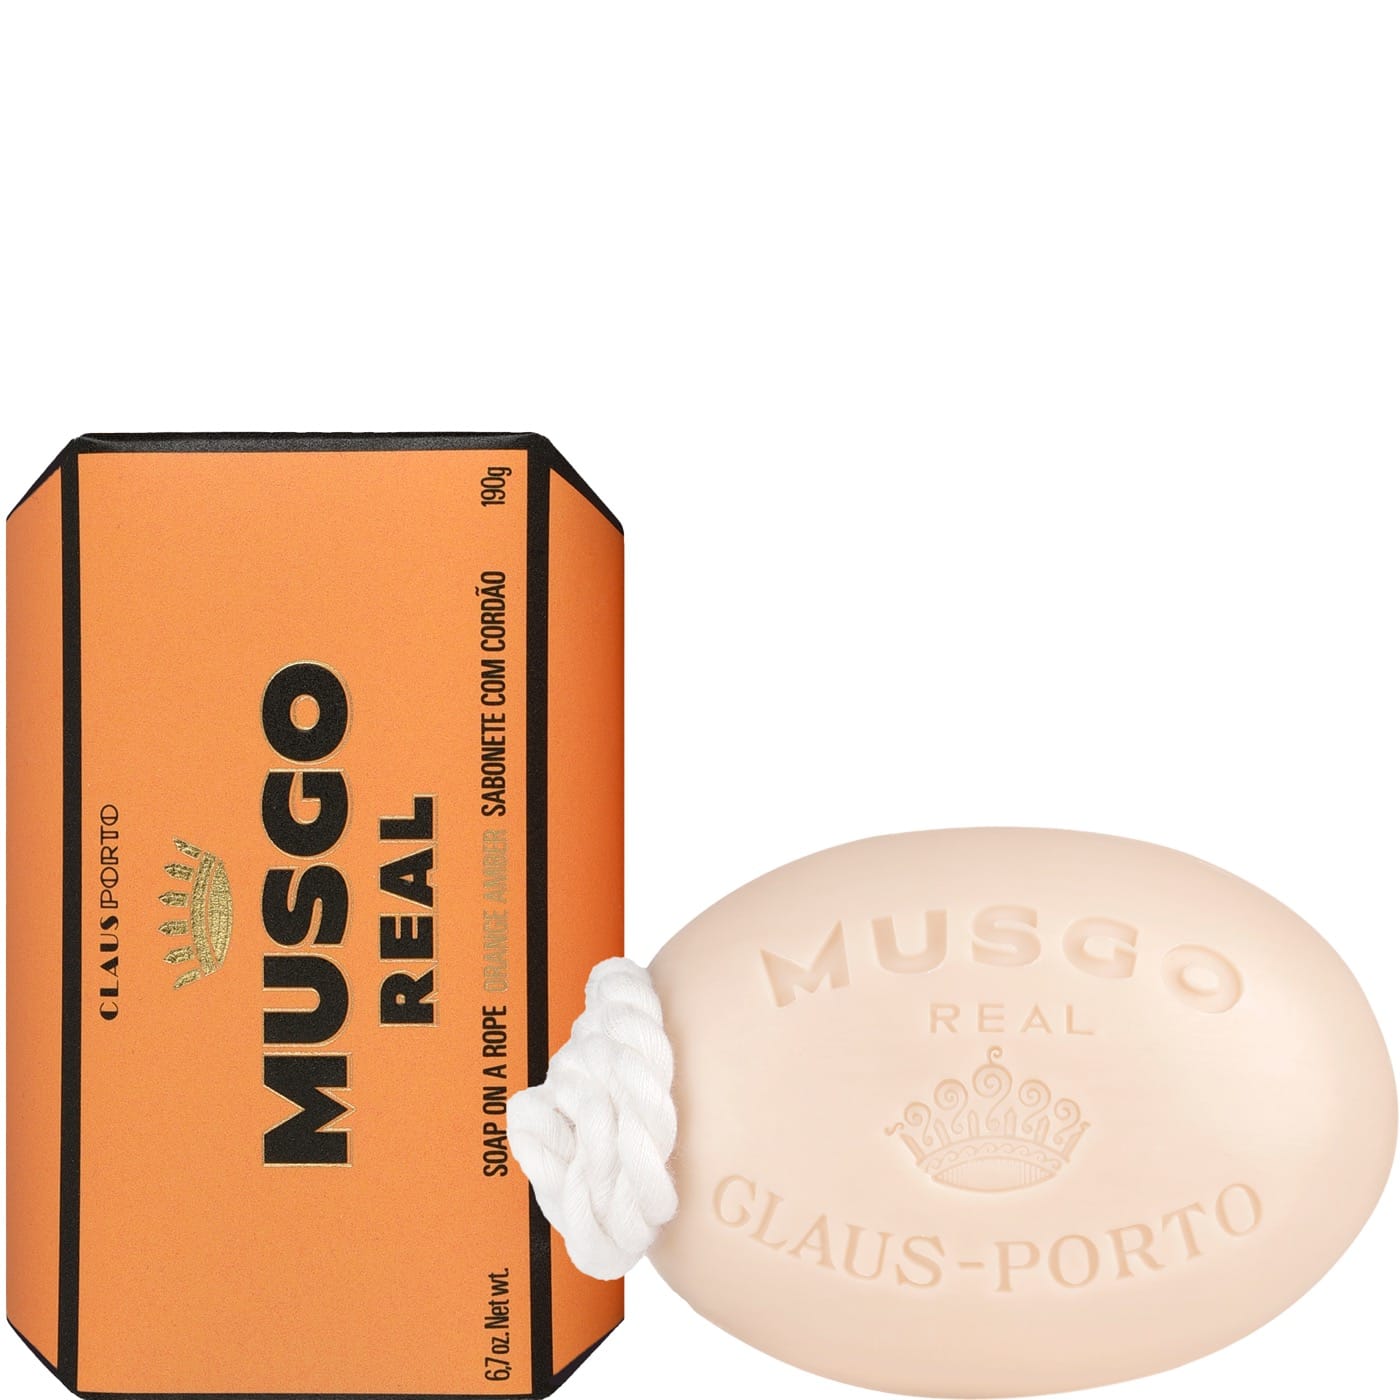 Musgo Real Soap on a Rope Orange Amber 190gr - 1.1 - MR-199CC001